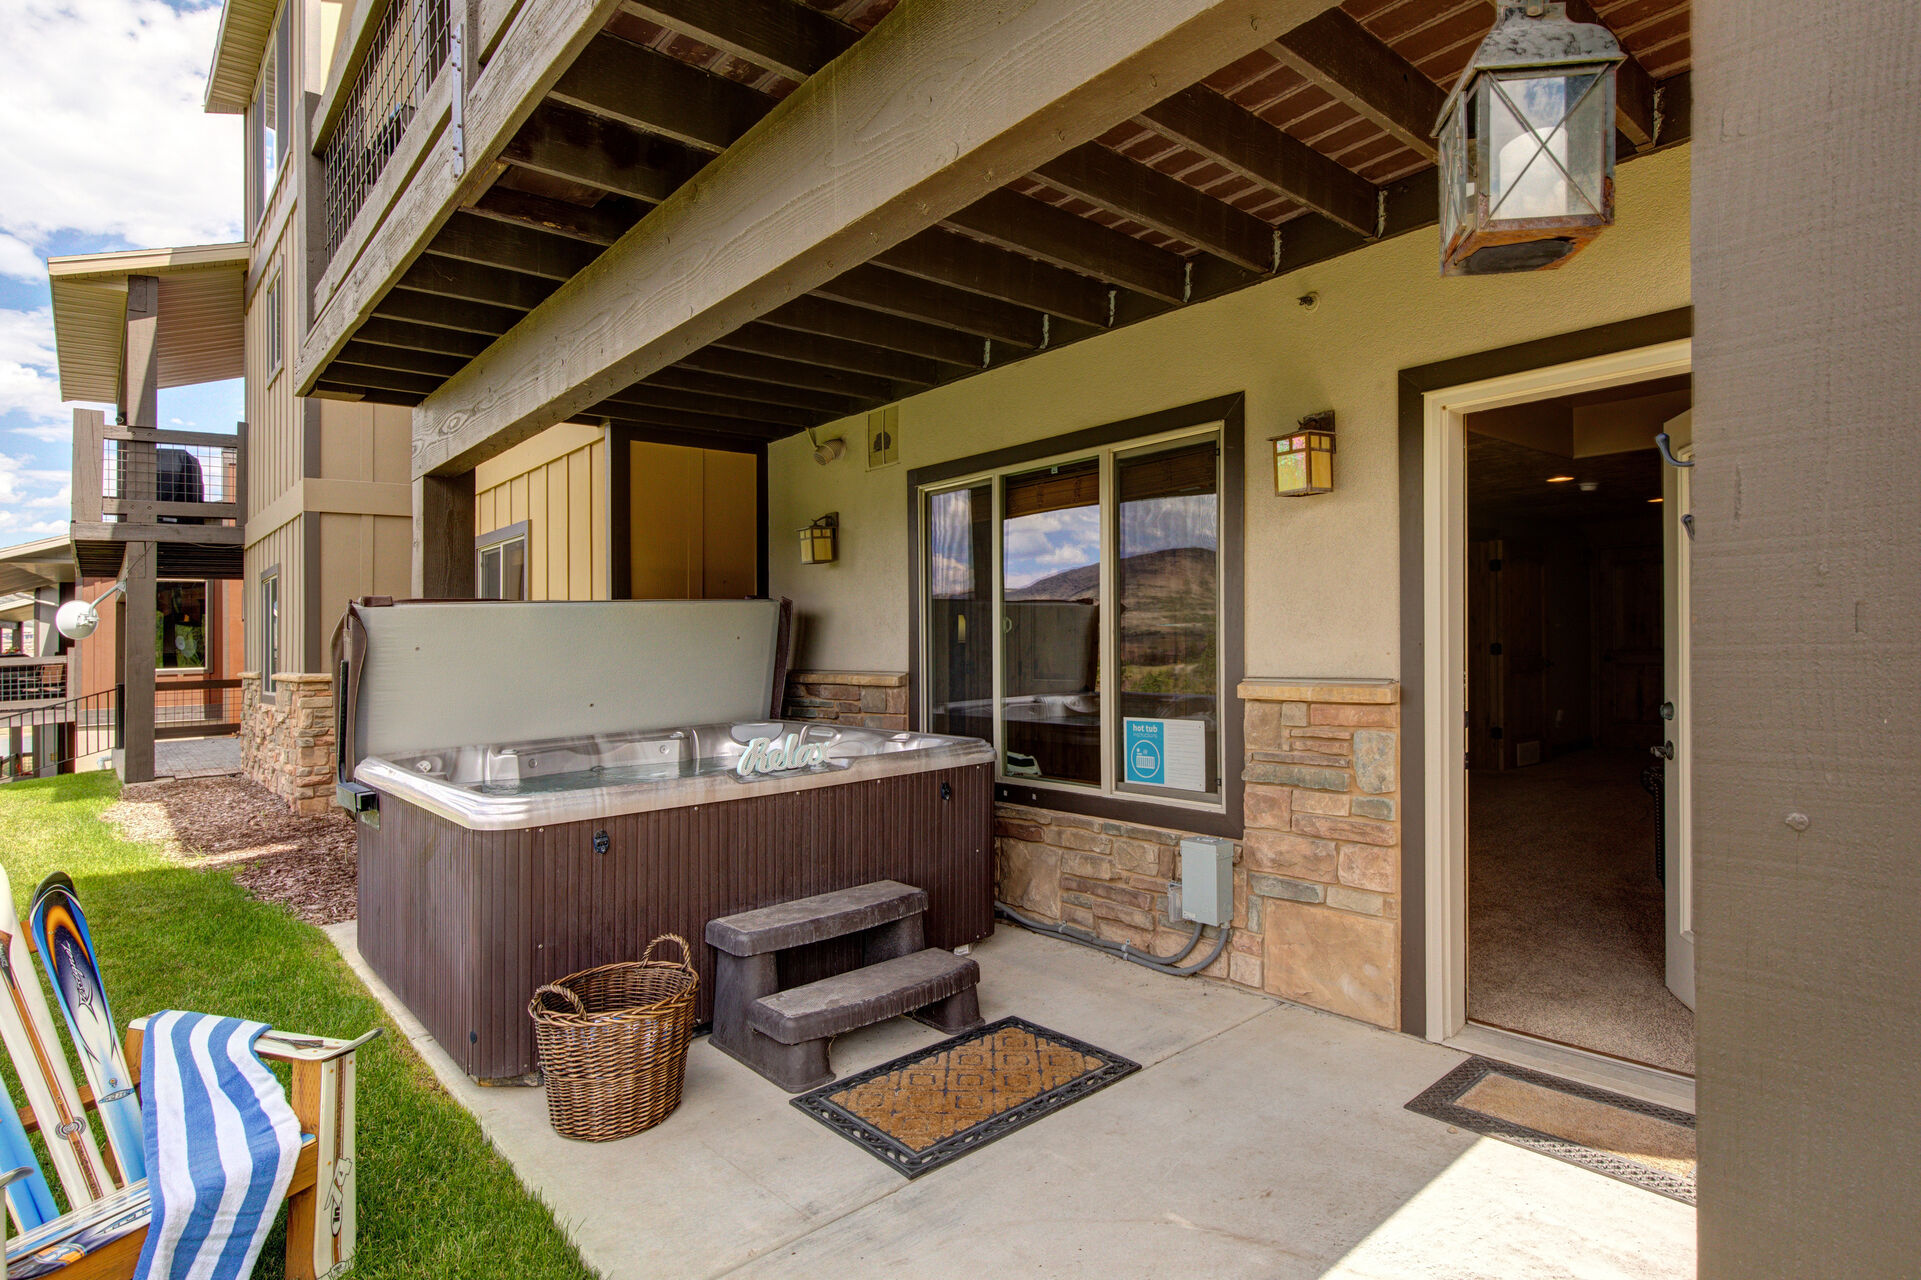 Lower Level Private Hot Tub Patio and back yard with Adirondack chairs, corn hole game, 8-person hot tub, and stunning surrounding views